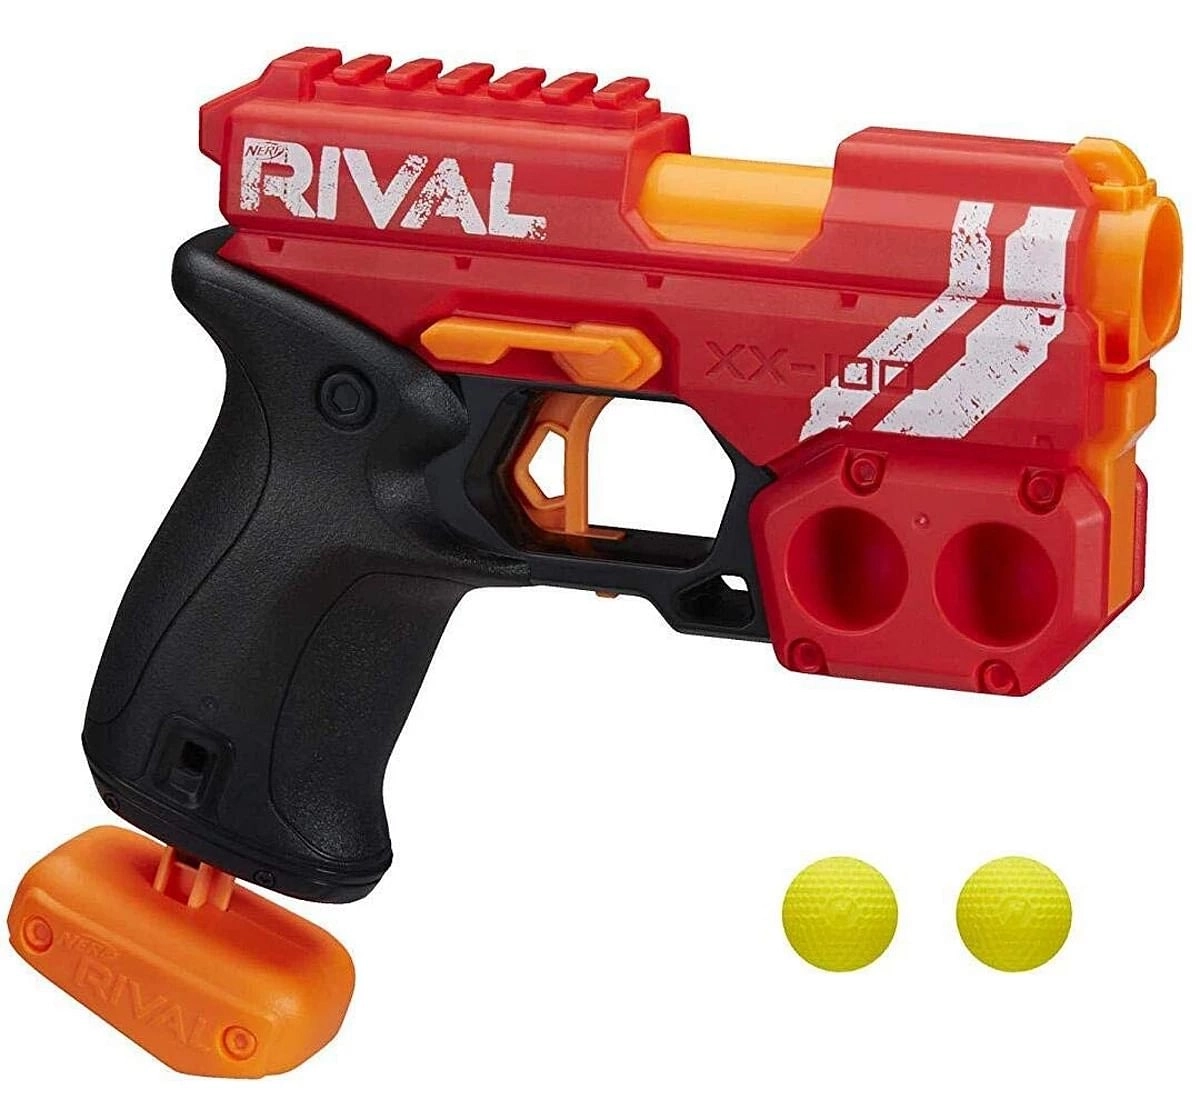 Nerf Rival Knockout XX-100 Blaster Toy Gun  -- Round Storage, 90 FPS Velocity, Breech Load  -- Includes 2 Official Nerf Rival Rounds -- Team Red Blasters for Kids age 14Y+, Assorted